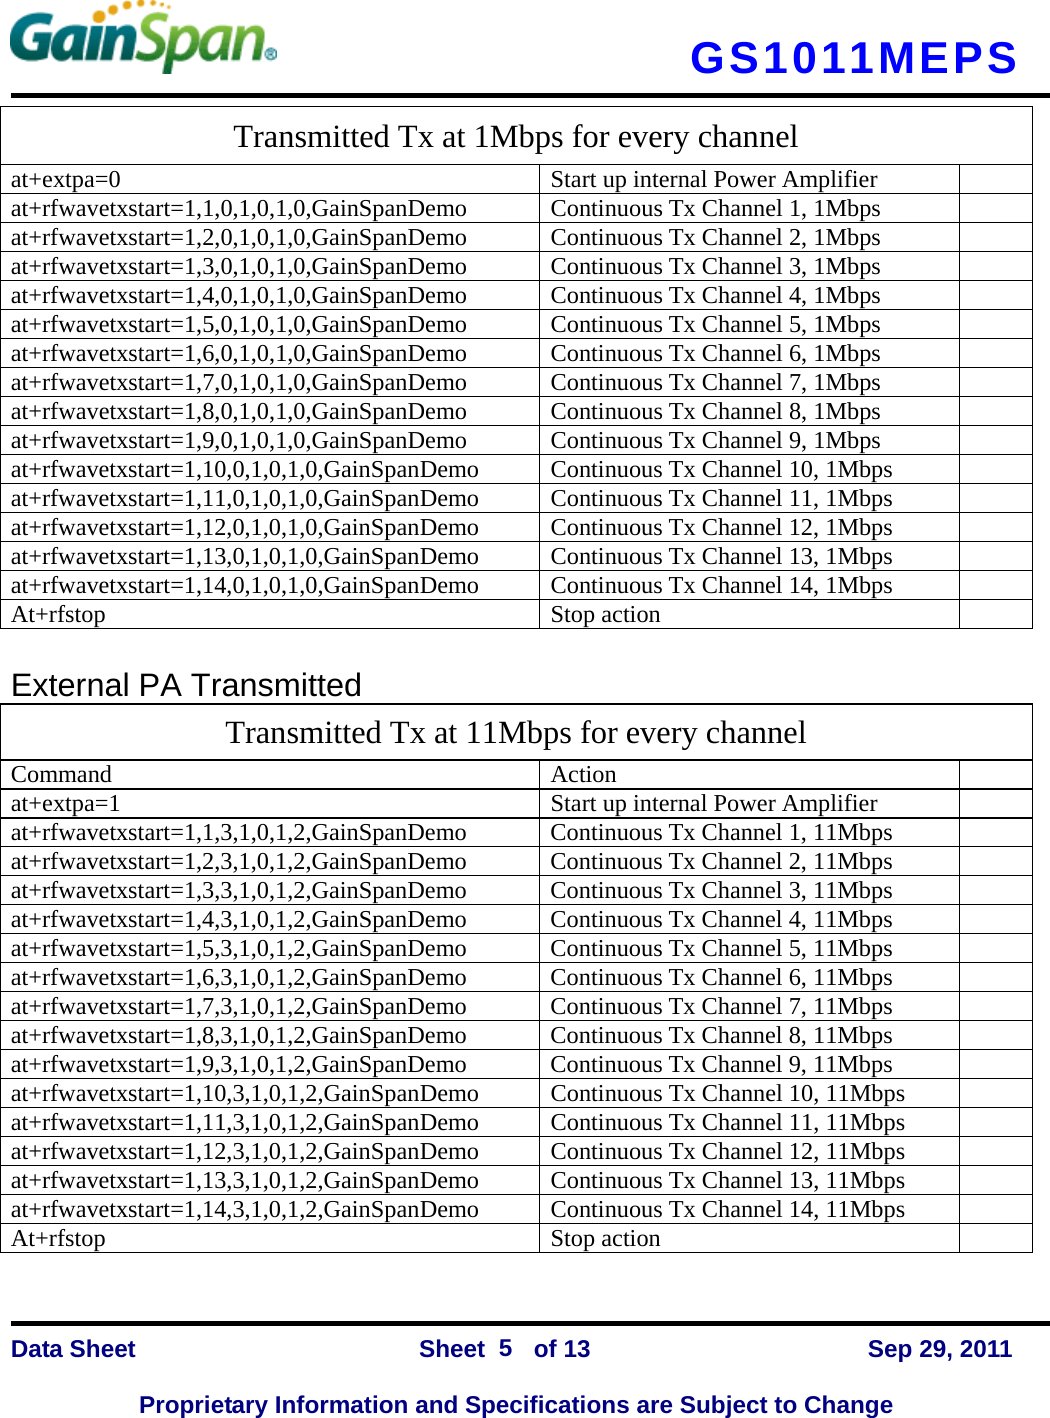   GS1011MEPS    Data Sheet                Sheet    of 13      Sep 29, 2011  Proprietary Information and Specifications are Subject to Change 5 Transmitted Tx at 1Mbps for every channel at+extpa=0  Start up internal Power Amplifier   at+rfwavetxstart=1,1,0,1,0,1,0,GainSpanDemo  Continuous Tx Channel 1, 1Mbps   at+rfwavetxstart=1,2,0,1,0,1,0,GainSpanDemo  Continuous Tx Channel 2, 1Mbps   at+rfwavetxstart=1,3,0,1,0,1,0,GainSpanDemo  Continuous Tx Channel 3, 1Mbps   at+rfwavetxstart=1,4,0,1,0,1,0,GainSpanDemo  Continuous Tx Channel 4, 1Mbps   at+rfwavetxstart=1,5,0,1,0,1,0,GainSpanDemo  Continuous Tx Channel 5, 1Mbps   at+rfwavetxstart=1,6,0,1,0,1,0,GainSpanDemo  Continuous Tx Channel 6, 1Mbps   at+rfwavetxstart=1,7,0,1,0,1,0,GainSpanDemo  Continuous Tx Channel 7, 1Mbps   at+rfwavetxstart=1,8,0,1,0,1,0,GainSpanDemo  Continuous Tx Channel 8, 1Mbps   at+rfwavetxstart=1,9,0,1,0,1,0,GainSpanDemo  Continuous Tx Channel 9, 1Mbps   at+rfwavetxstart=1,10,0,1,0,1,0,GainSpanDemo  Continuous Tx Channel 10, 1Mbps   at+rfwavetxstart=1,11,0,1,0,1,0,GainSpanDemo  Continuous Tx Channel 11, 1Mbps   at+rfwavetxstart=1,12,0,1,0,1,0,GainSpanDemo  Continuous Tx Channel 12, 1Mbps   at+rfwavetxstart=1,13,0,1,0,1,0,GainSpanDemo  Continuous Tx Channel 13, 1Mbps   at+rfwavetxstart=1,14,0,1,0,1,0,GainSpanDemo  Continuous Tx Channel 14, 1Mbps   At+rfstop Stop action   External PA Transmitted Transmitted Tx at 11Mbps for every channel Command Action  at+extpa=1  Start up internal Power Amplifier   at+rfwavetxstart=1,1,3,1,0,1,2,GainSpanDemo  Continuous Tx Channel 1, 11Mbps   at+rfwavetxstart=1,2,3,1,0,1,2,GainSpanDemo  Continuous Tx Channel 2, 11Mbps   at+rfwavetxstart=1,3,3,1,0,1,2,GainSpanDemo  Continuous Tx Channel 3, 11Mbps   at+rfwavetxstart=1,4,3,1,0,1,2,GainSpanDemo  Continuous Tx Channel 4, 11Mbps   at+rfwavetxstart=1,5,3,1,0,1,2,GainSpanDemo  Continuous Tx Channel 5, 11Mbps   at+rfwavetxstart=1,6,3,1,0,1,2,GainSpanDemo  Continuous Tx Channel 6, 11Mbps   at+rfwavetxstart=1,7,3,1,0,1,2,GainSpanDemo  Continuous Tx Channel 7, 11Mbps   at+rfwavetxstart=1,8,3,1,0,1,2,GainSpanDemo  Continuous Tx Channel 8, 11Mbps   at+rfwavetxstart=1,9,3,1,0,1,2,GainSpanDemo  Continuous Tx Channel 9, 11Mbps   at+rfwavetxstart=1,10,3,1,0,1,2,GainSpanDemo  Continuous Tx Channel 10, 11Mbps   at+rfwavetxstart=1,11,3,1,0,1,2,GainSpanDemo  Continuous Tx Channel 11, 11Mbps   at+rfwavetxstart=1,12,3,1,0,1,2,GainSpanDemo  Continuous Tx Channel 12, 11Mbps   at+rfwavetxstart=1,13,3,1,0,1,2,GainSpanDemo  Continuous Tx Channel 13, 11Mbps   at+rfwavetxstart=1,14,3,1,0,1,2,GainSpanDemo  Continuous Tx Channel 14, 11Mbps   At+rfstop Stop action  